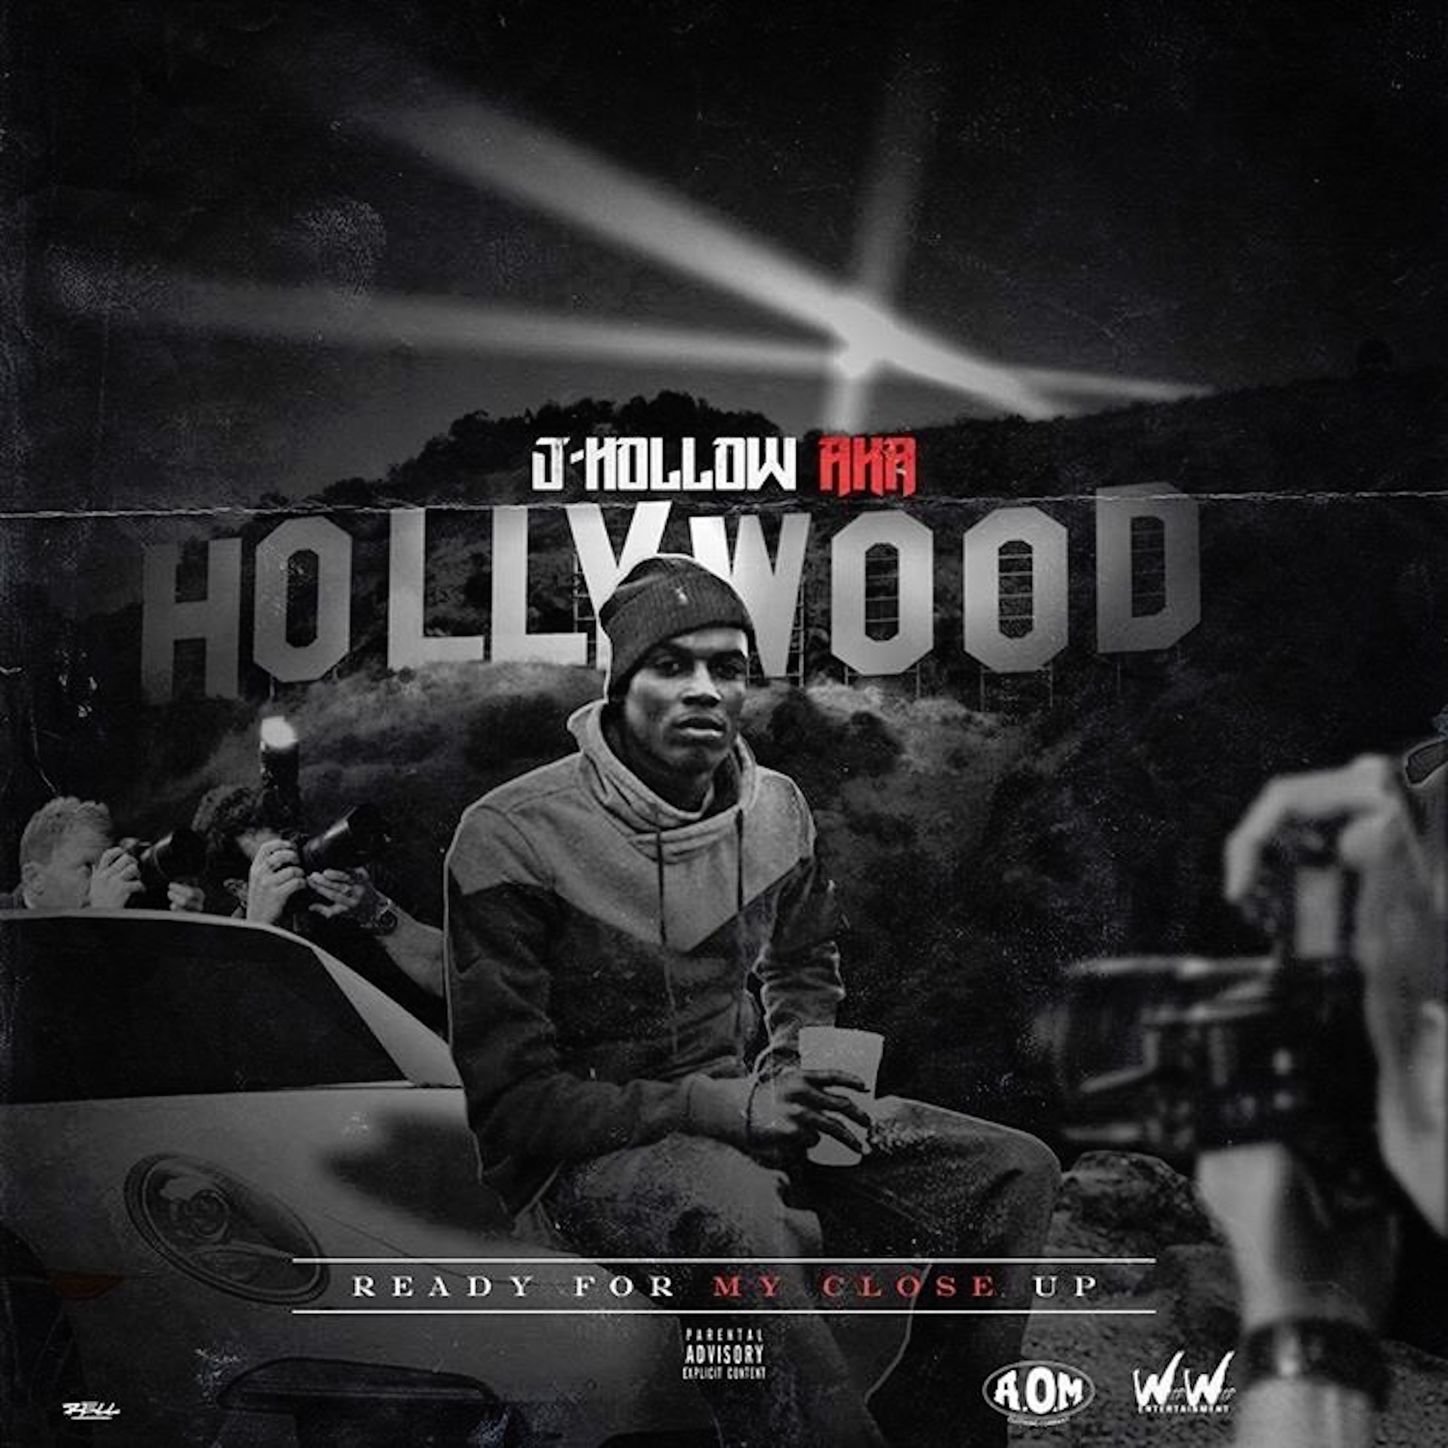 J-Hollow aka Hollywood - Ready For My Close Up (2017) FLAC Download